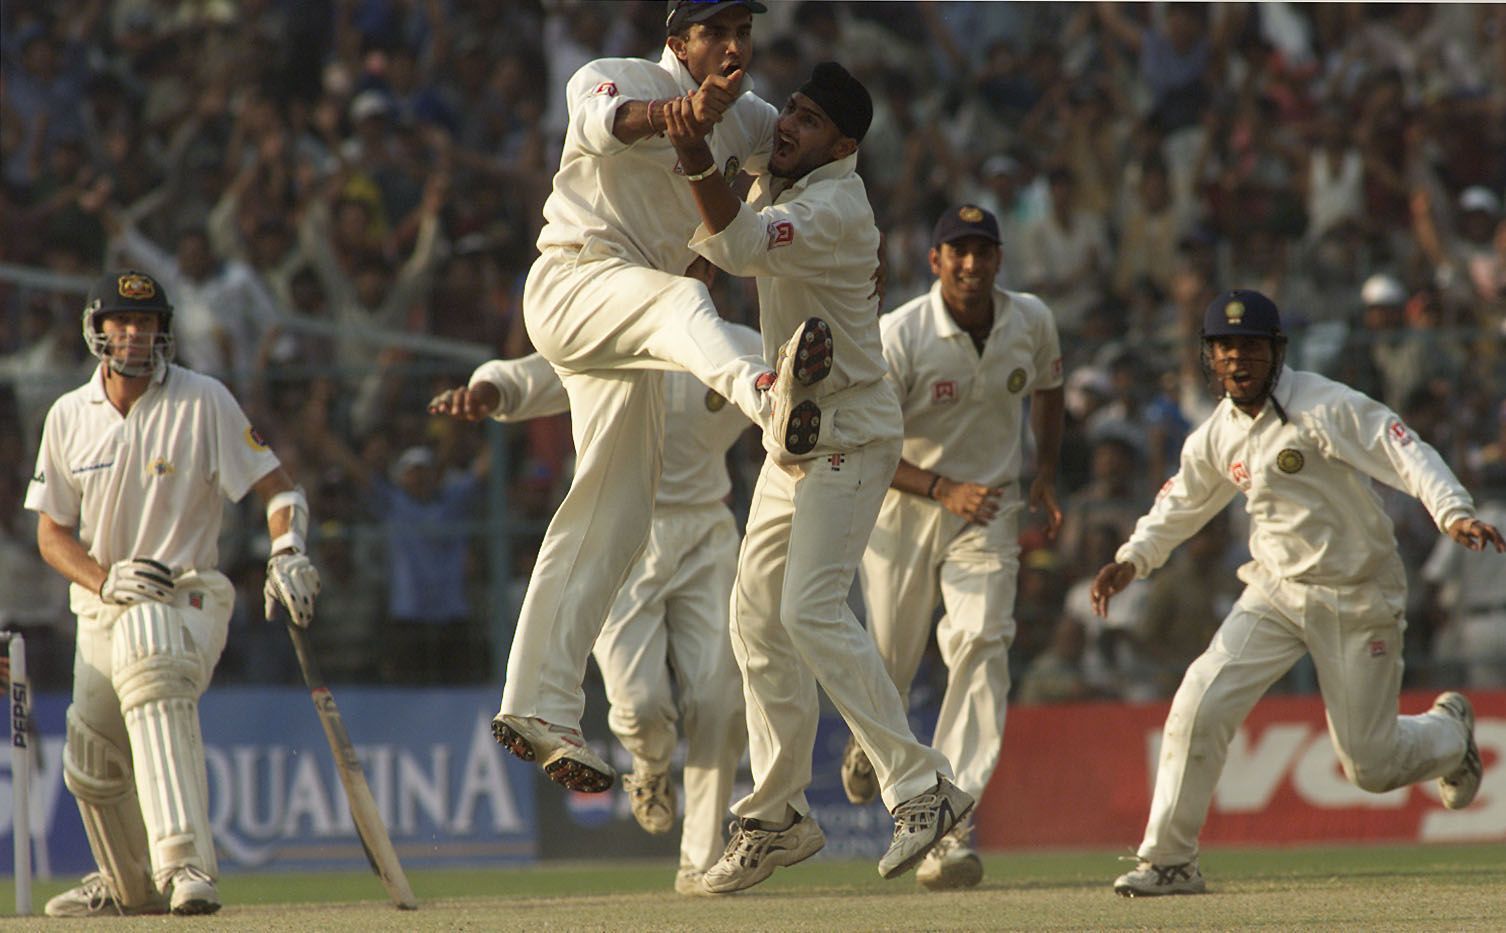 Harbhajan Singh (right) and Sourav Ganguly celebrate after India win the 2001 Kolkata Test. Pic: Getty Images